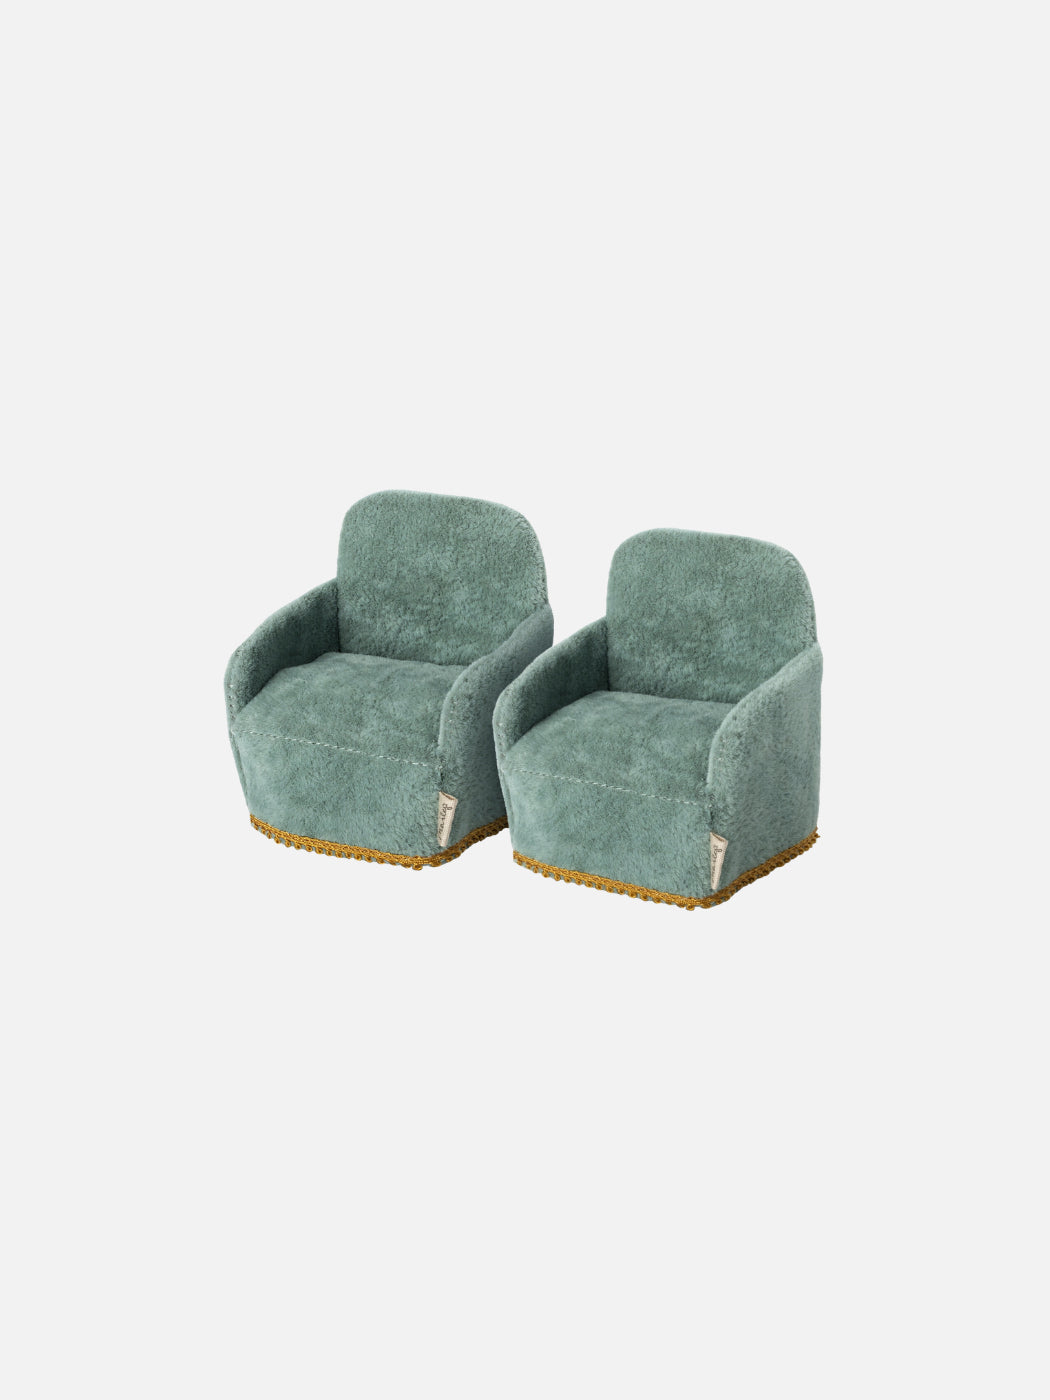 Mouse Chairs - Blue